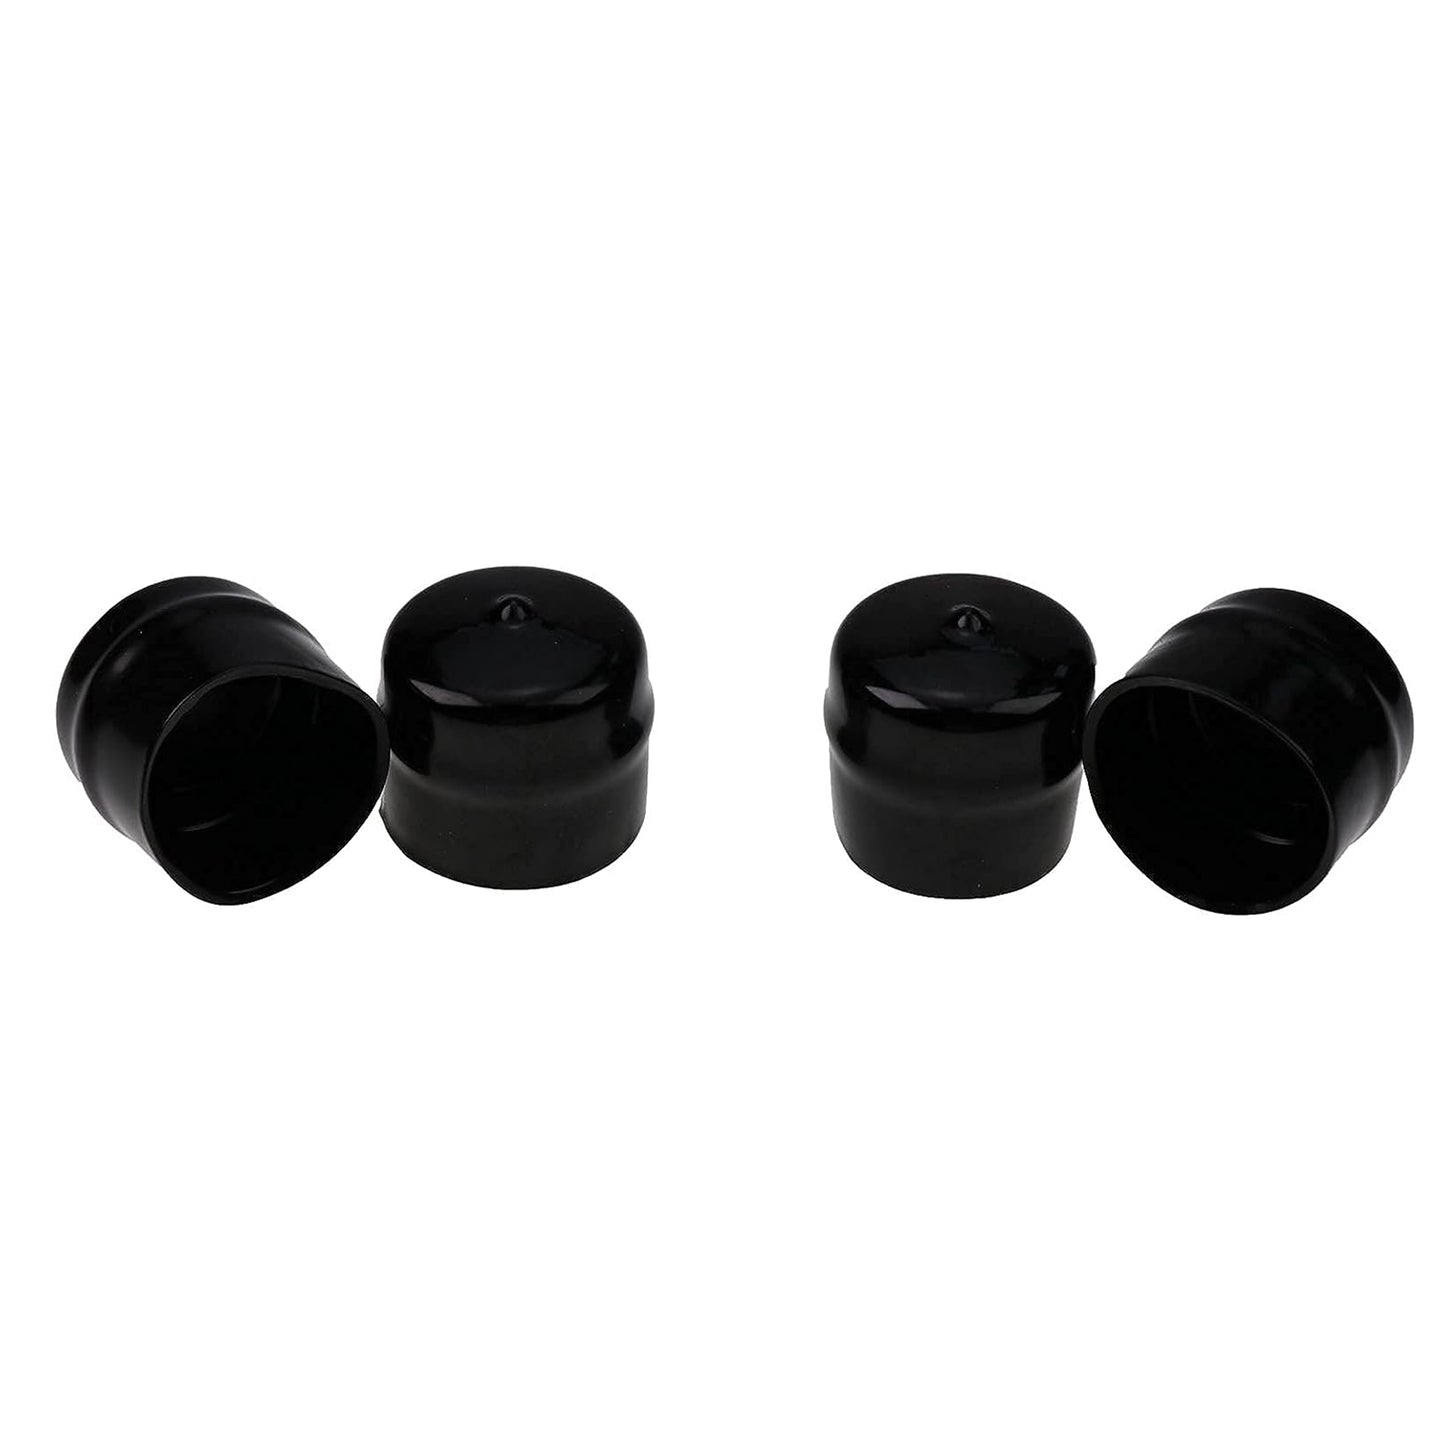 4PCS 532104757 Rubber Wheel Axle Hub Caps Compatible with Husqvarna, Weed Eater